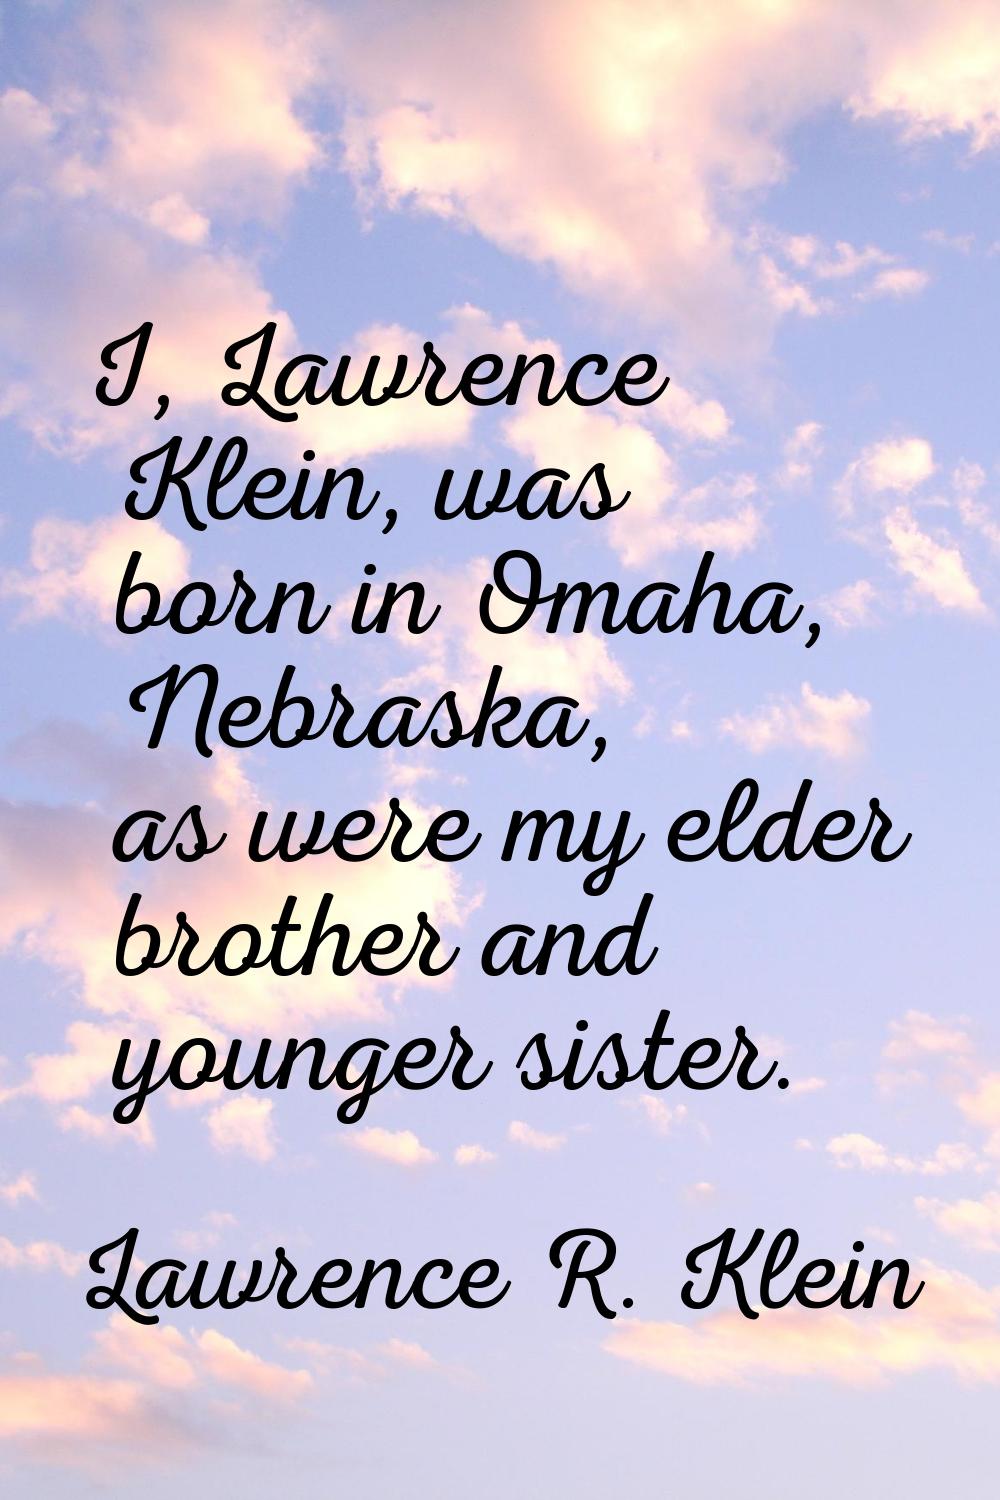 I, Lawrence Klein, was born in Omaha, Nebraska, as were my elder brother and younger sister.